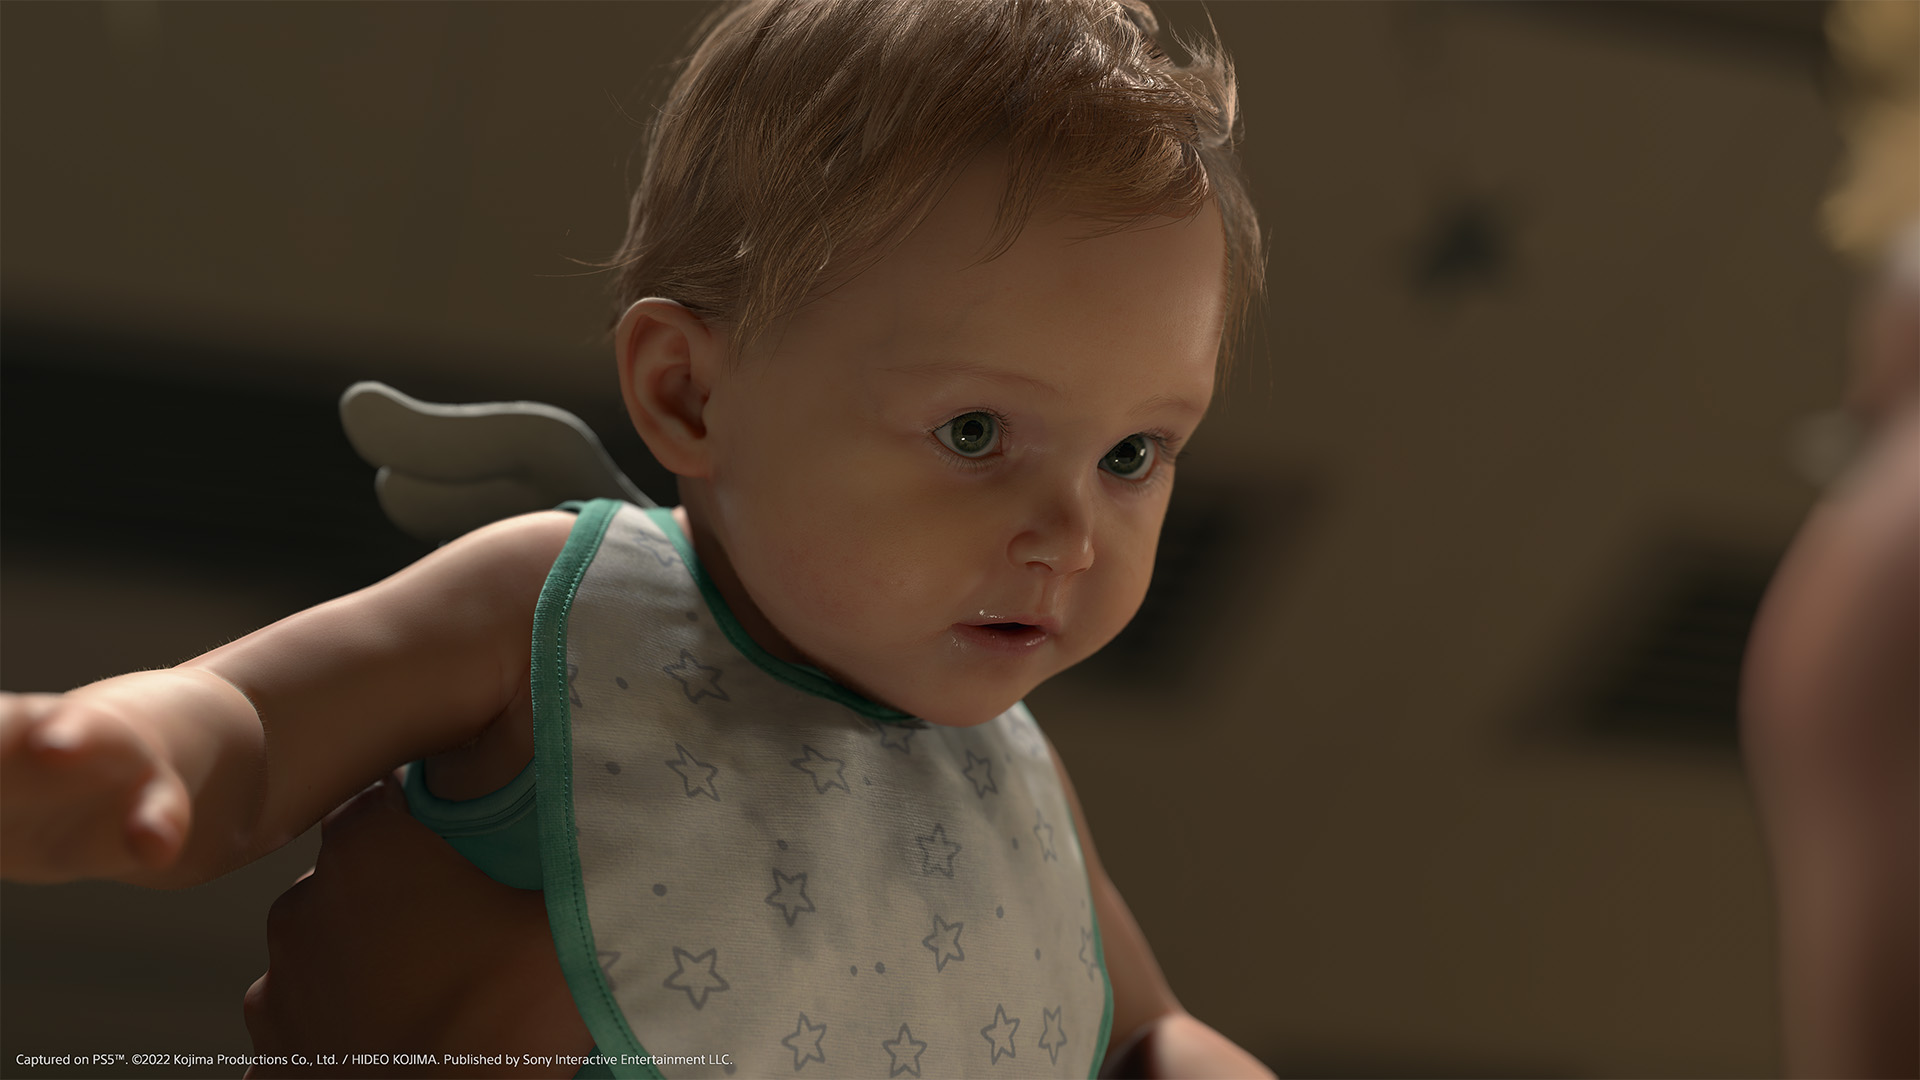 Death Stranding 2 Release Date: PS4, PS5, Xbox, PC, Switch - GameRevolution